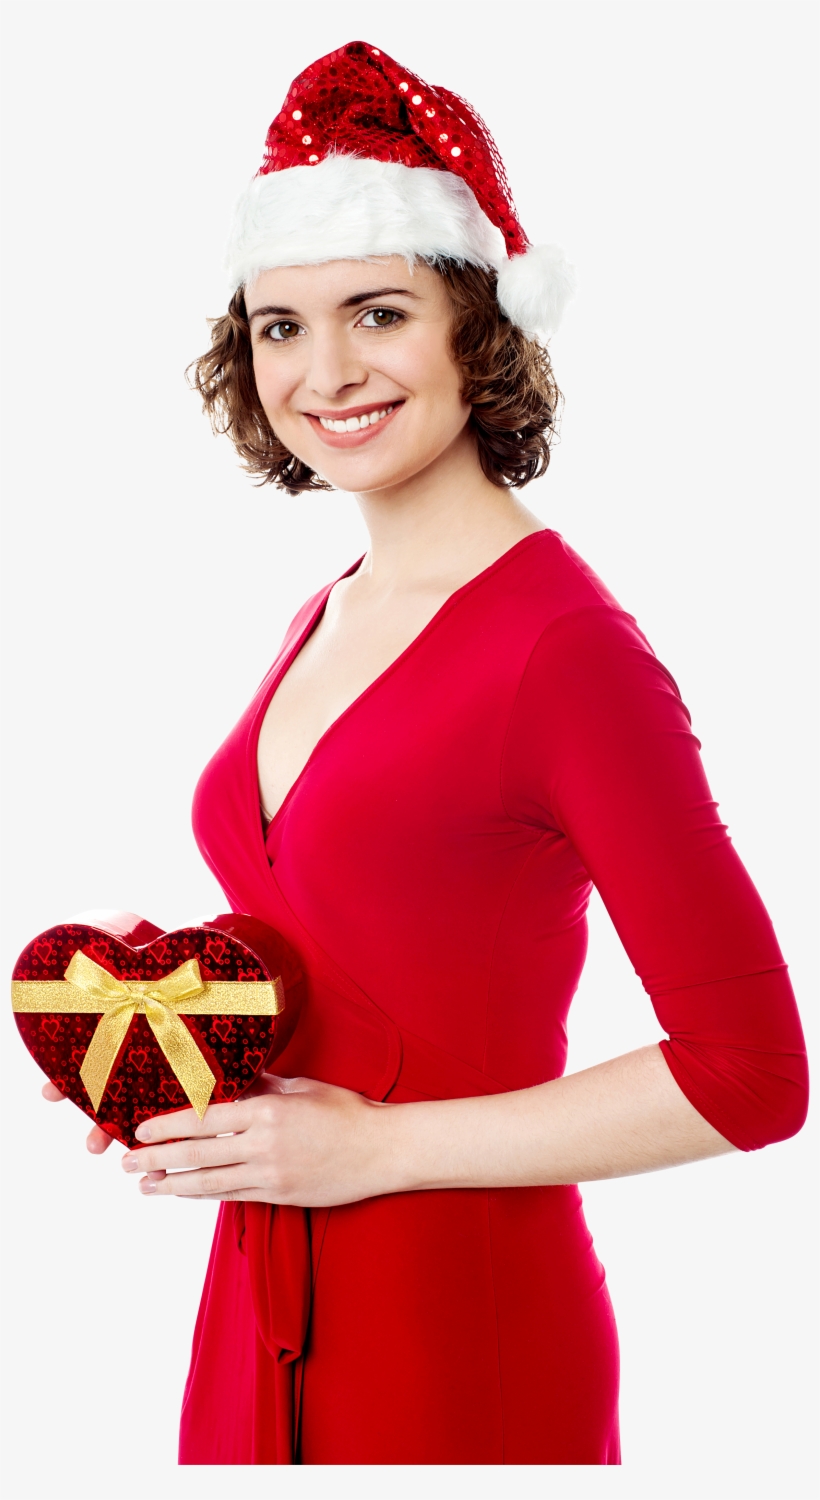 Female Santa Claus Png - Christmas Day, transparent png #2527948